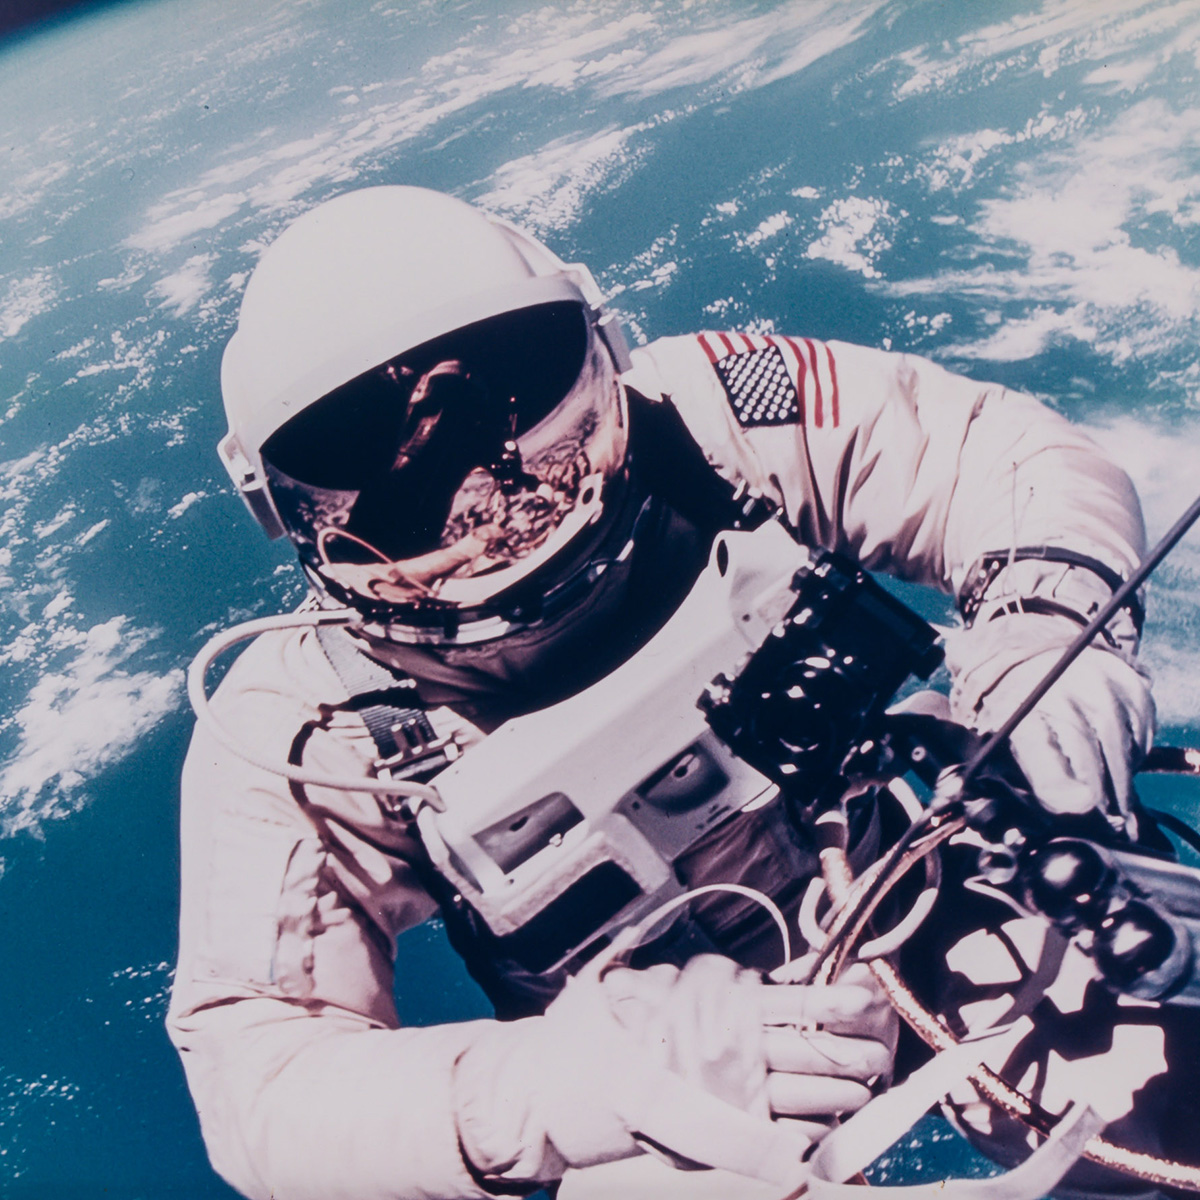 Snap up Buzz Aldrin and co’s ‘space selfies’ at auction | Classic ...